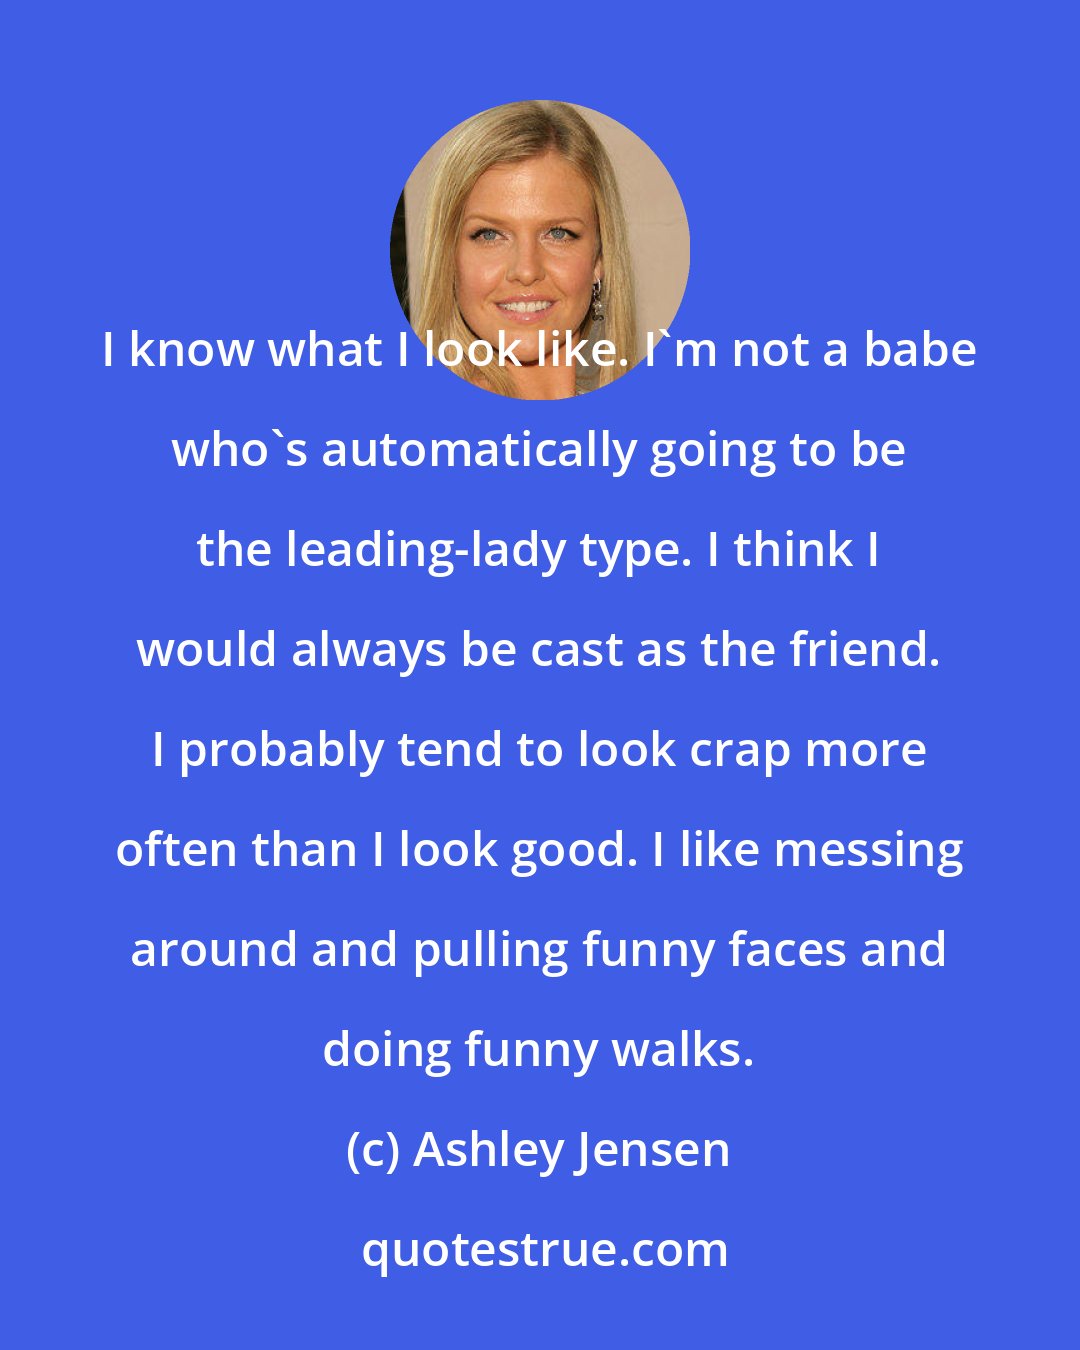 Ashley Jensen: I know what I look like. I'm not a babe who's automatically going to be the leading-lady type. I think I would always be cast as the friend. I probably tend to look crap more often than I look good. I like messing around and pulling funny faces and doing funny walks.